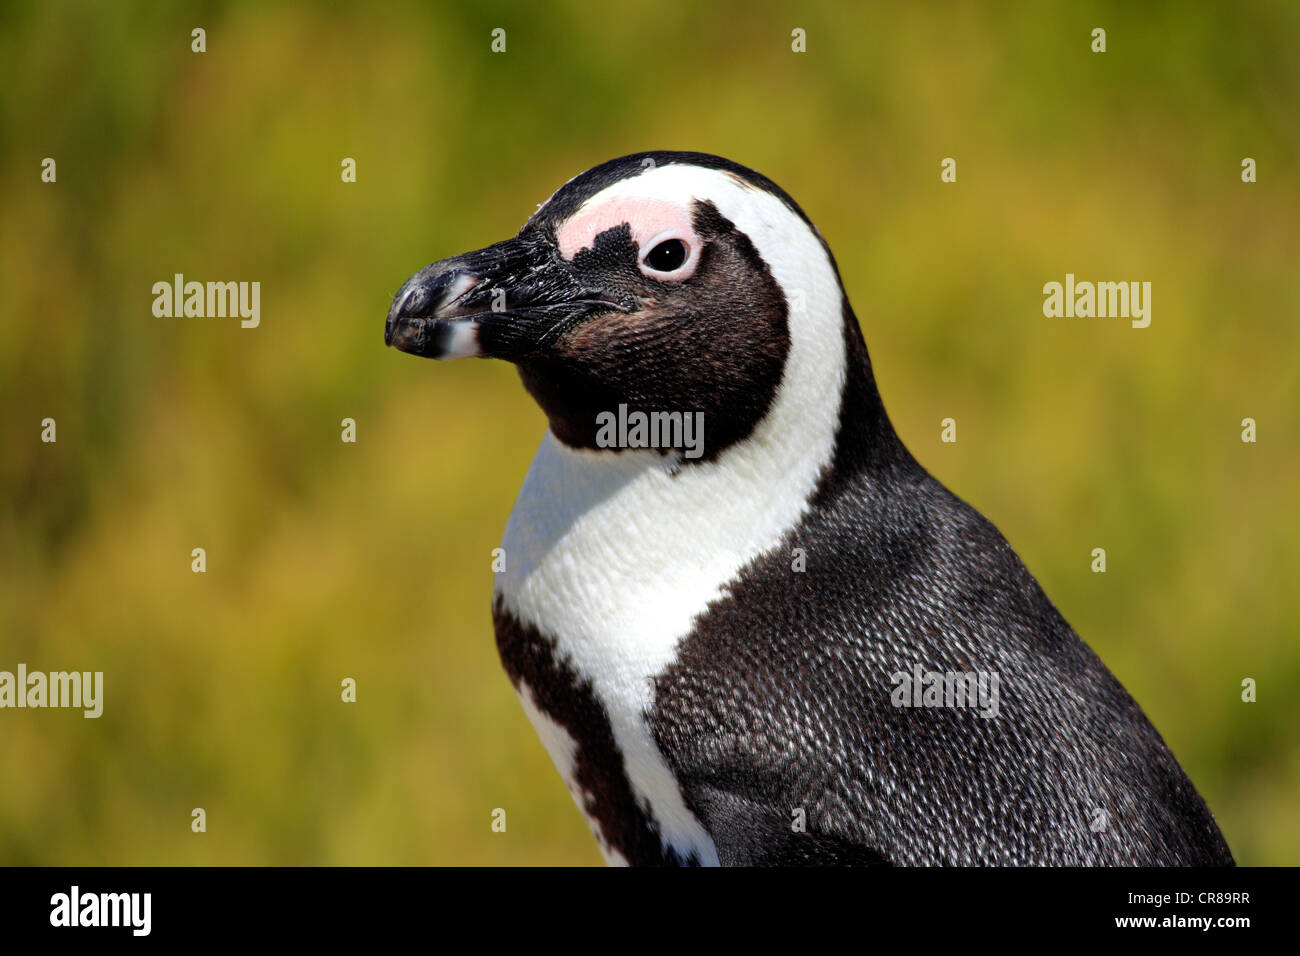 African penguin or Black-footed Penguin (Spheniscus demersus), portrait, Boulder, Simon's Town, South Africa, Africa Stock Photo